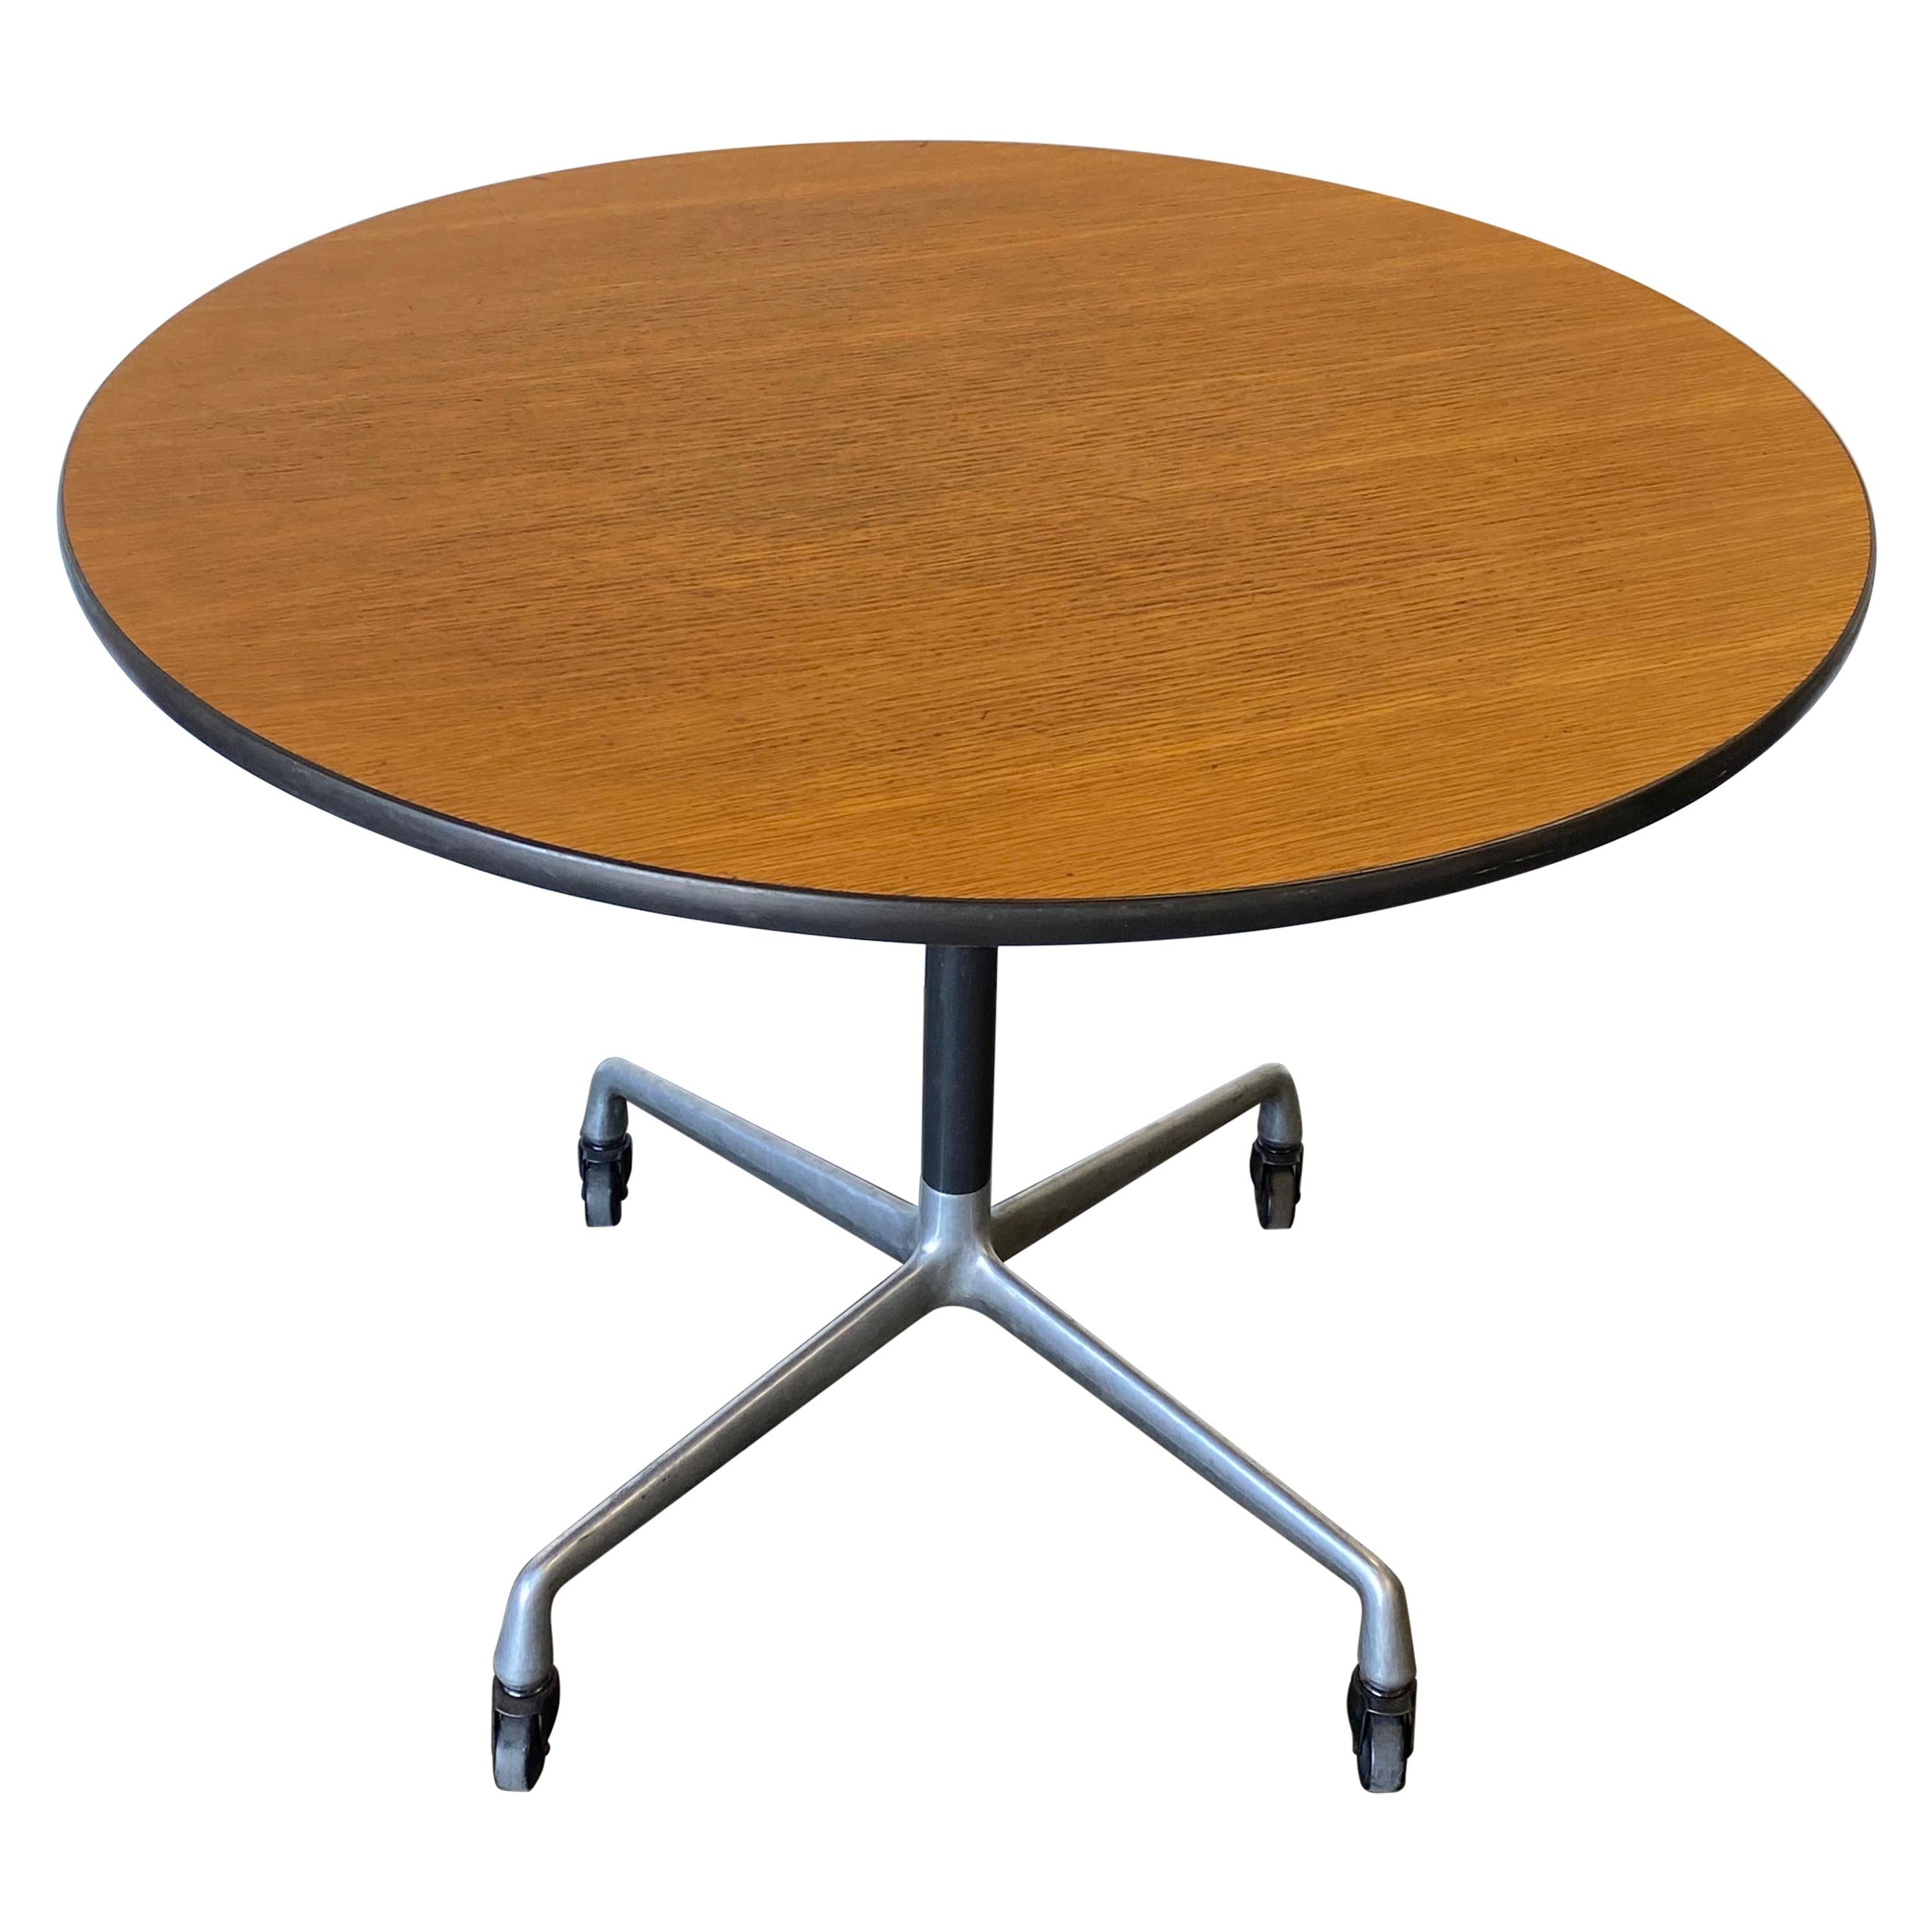 Herman Miller Eames Wood Top Dining Table on Aluminum Base with Casters